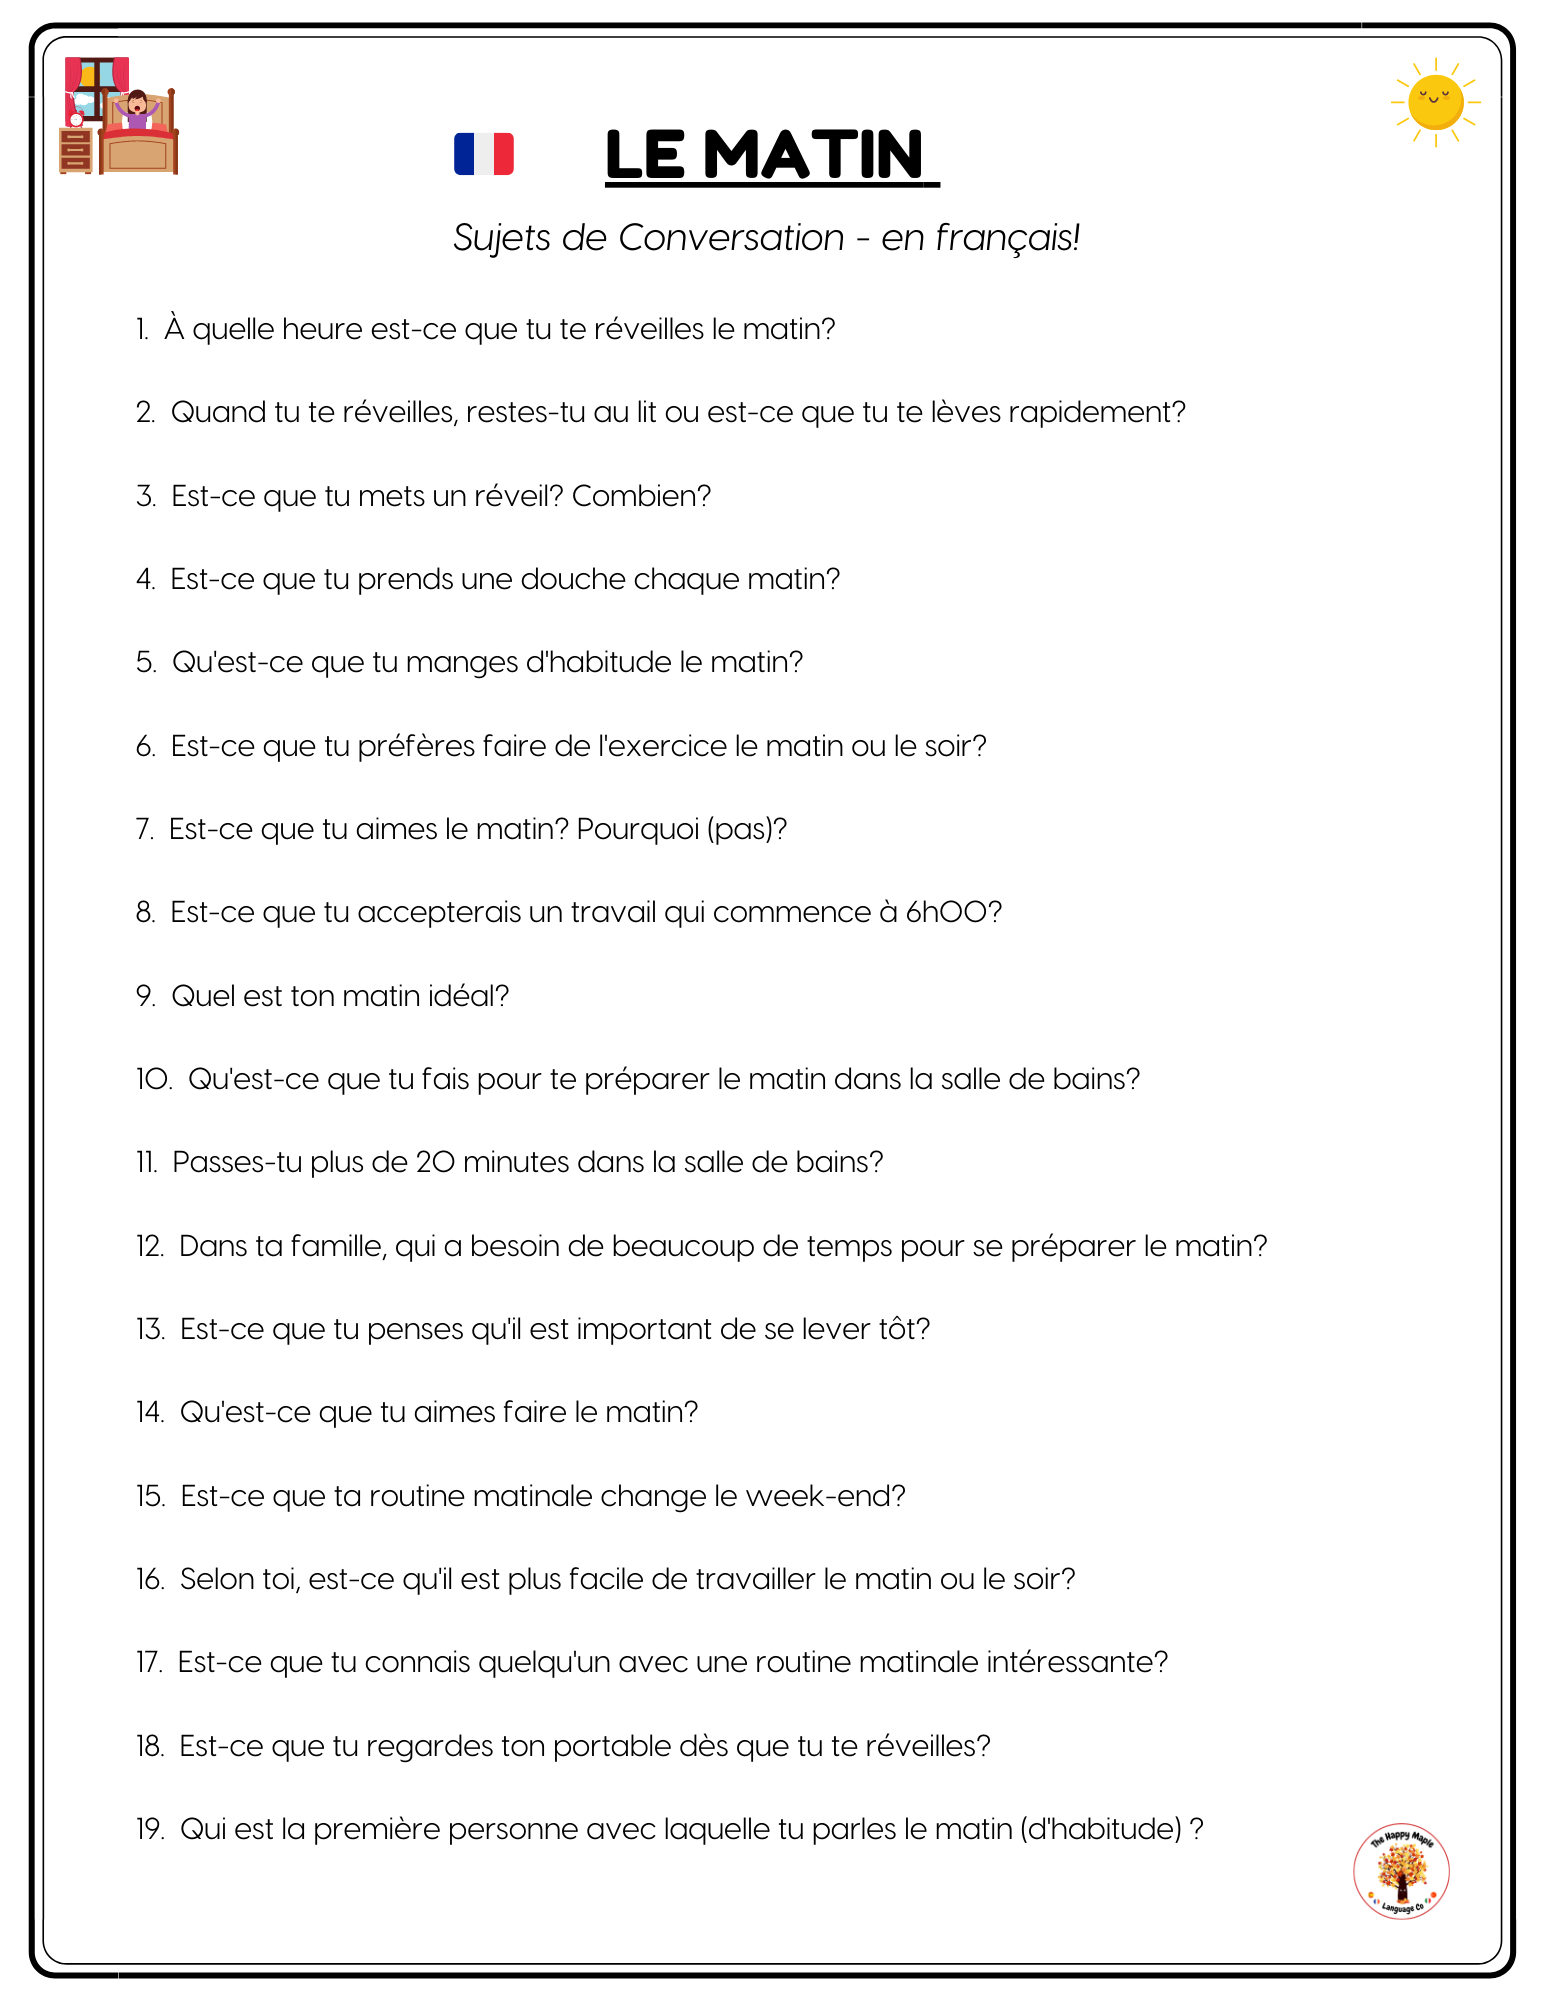 French Morning / Matin Conversation Questions Free Download